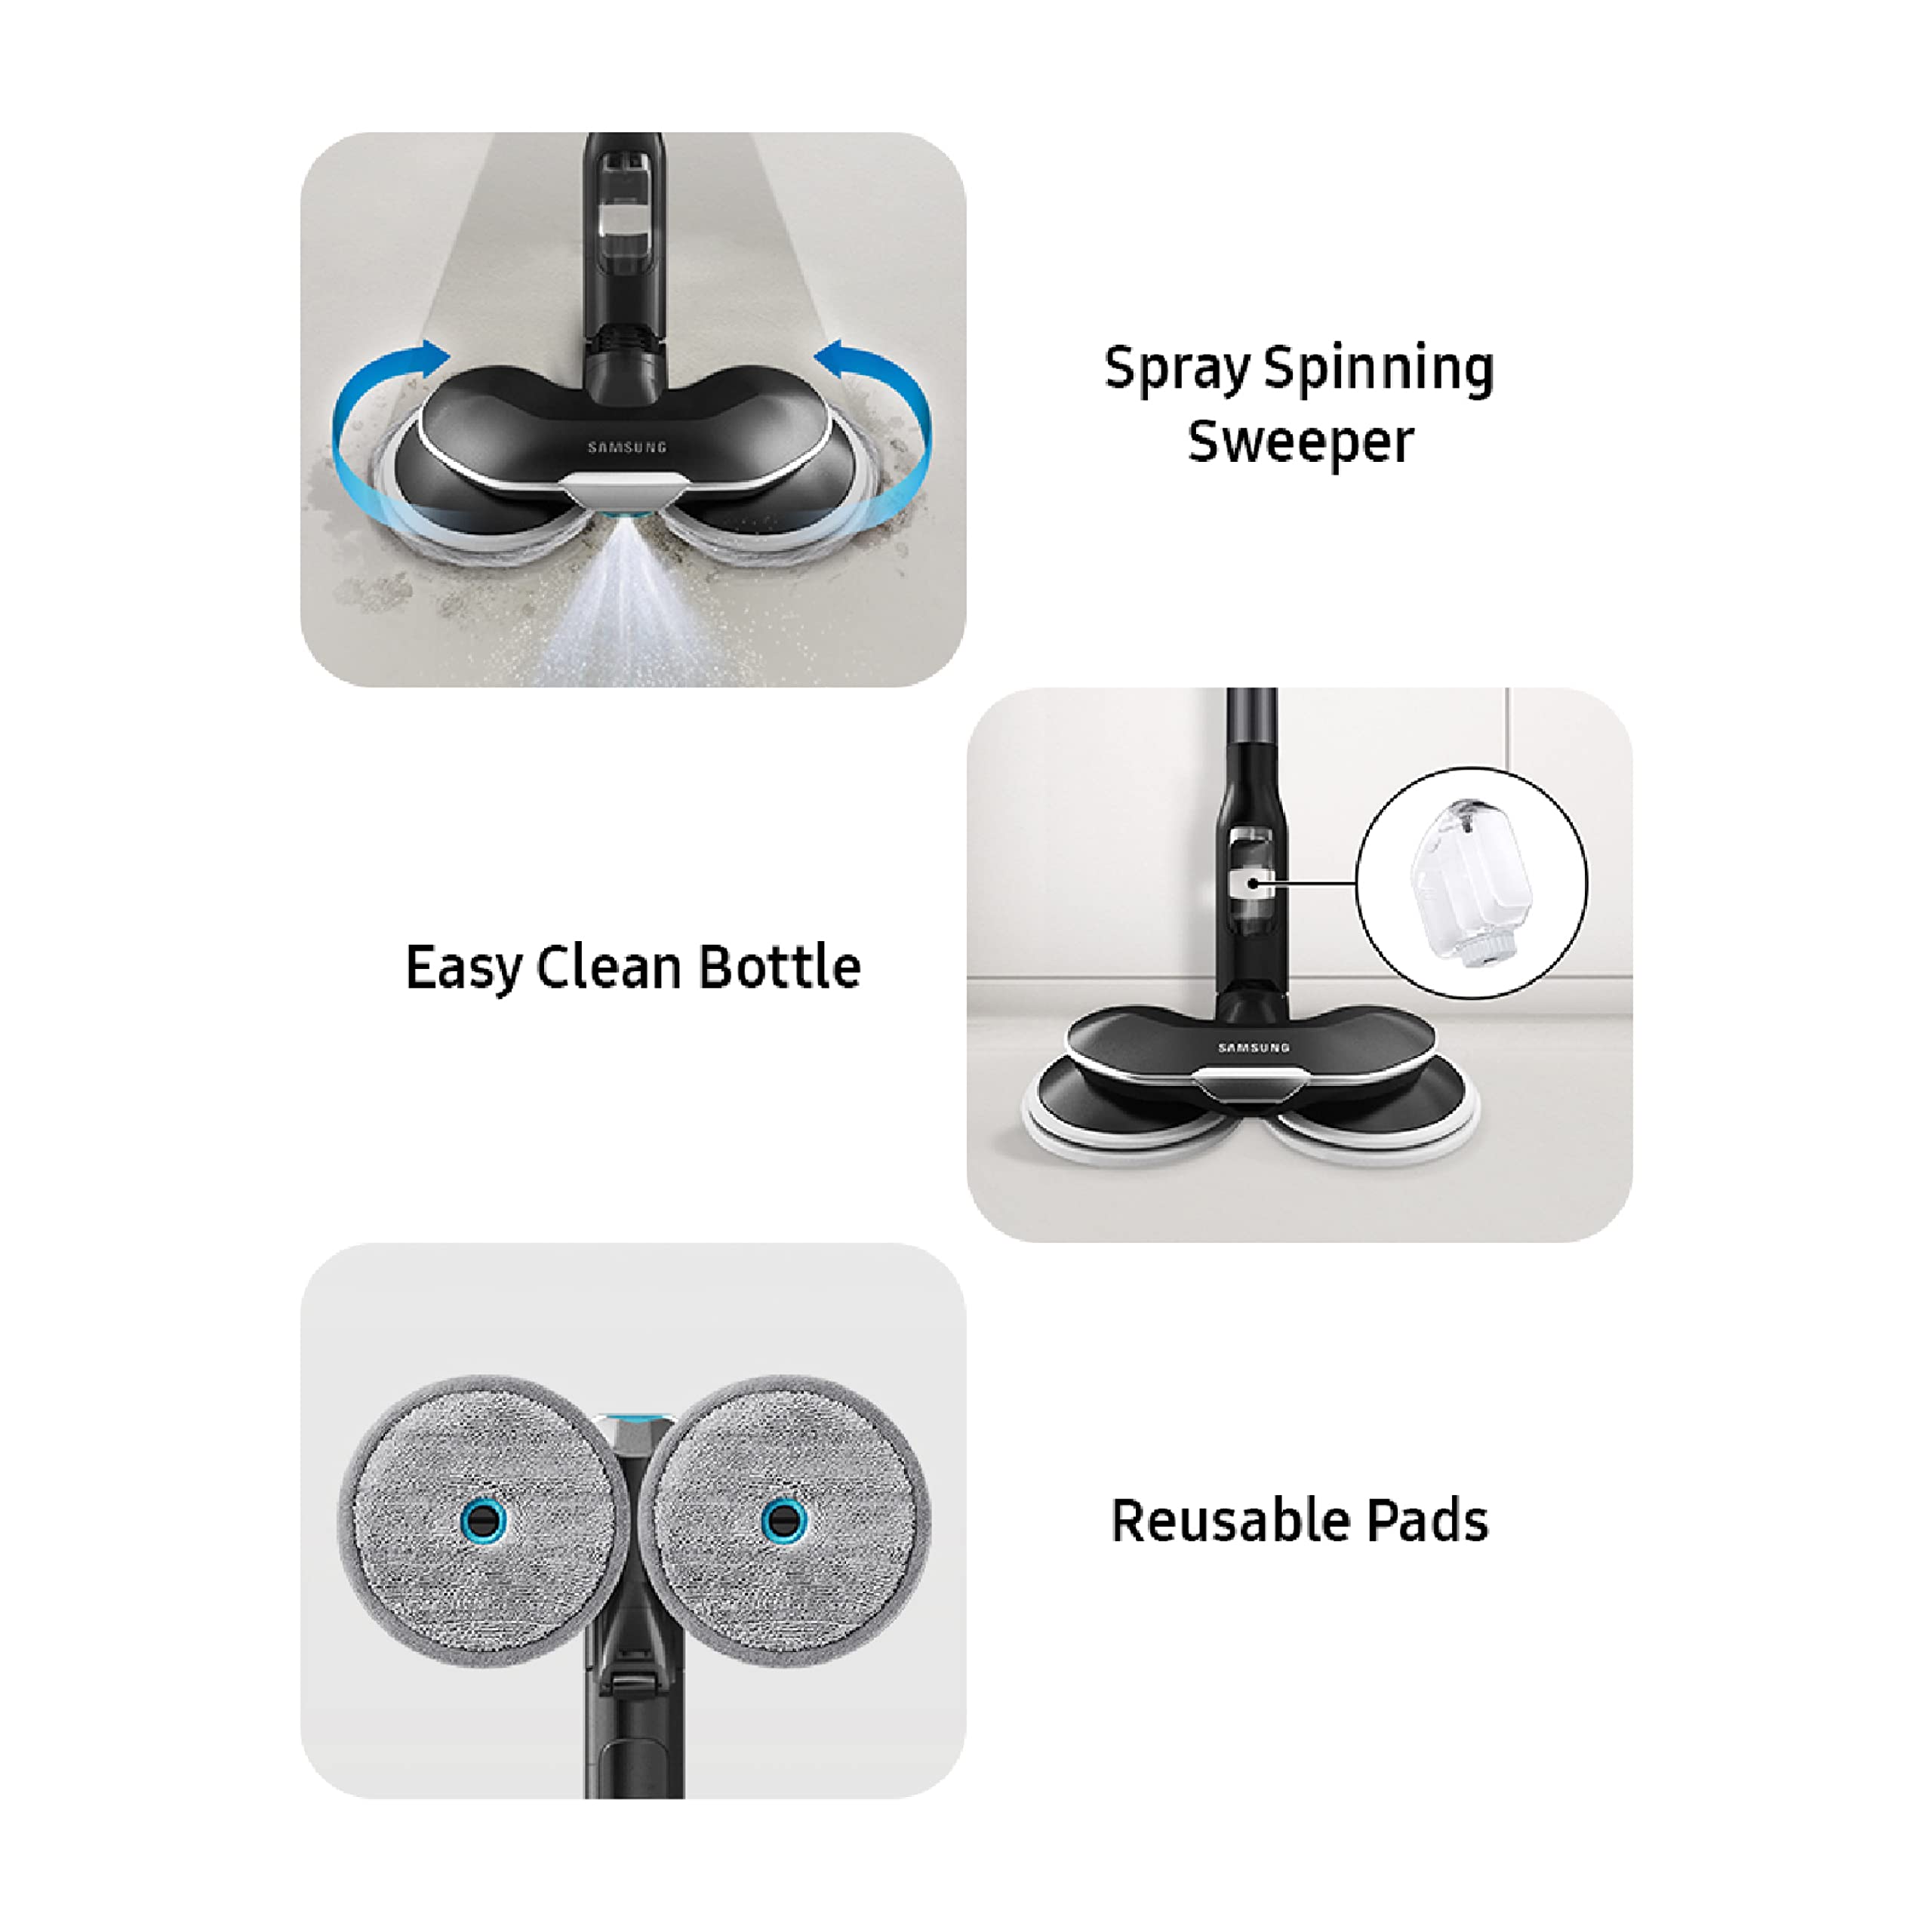 SAMSUNG Bespoke Jet Spray Spinning Sweeper Brush Vacuum Mopping Attachment, Silver